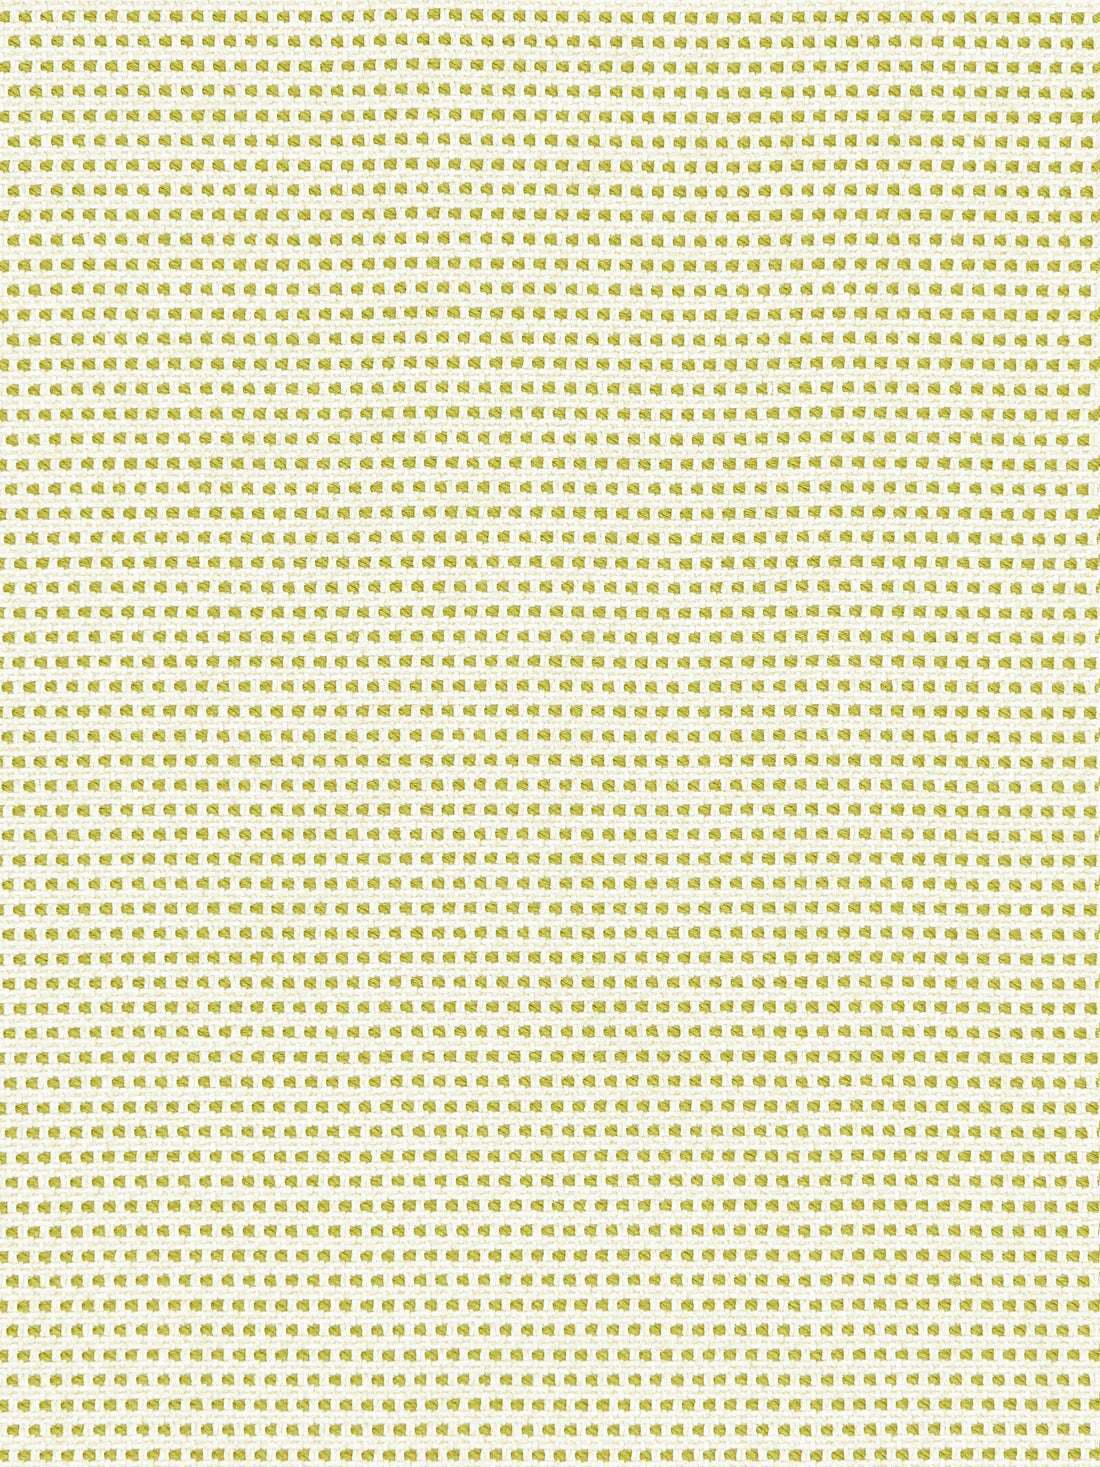 El Faro Beach fabric in citrine color - pattern number EA 00016037 - by Scalamandre in the Old World Weavers collection